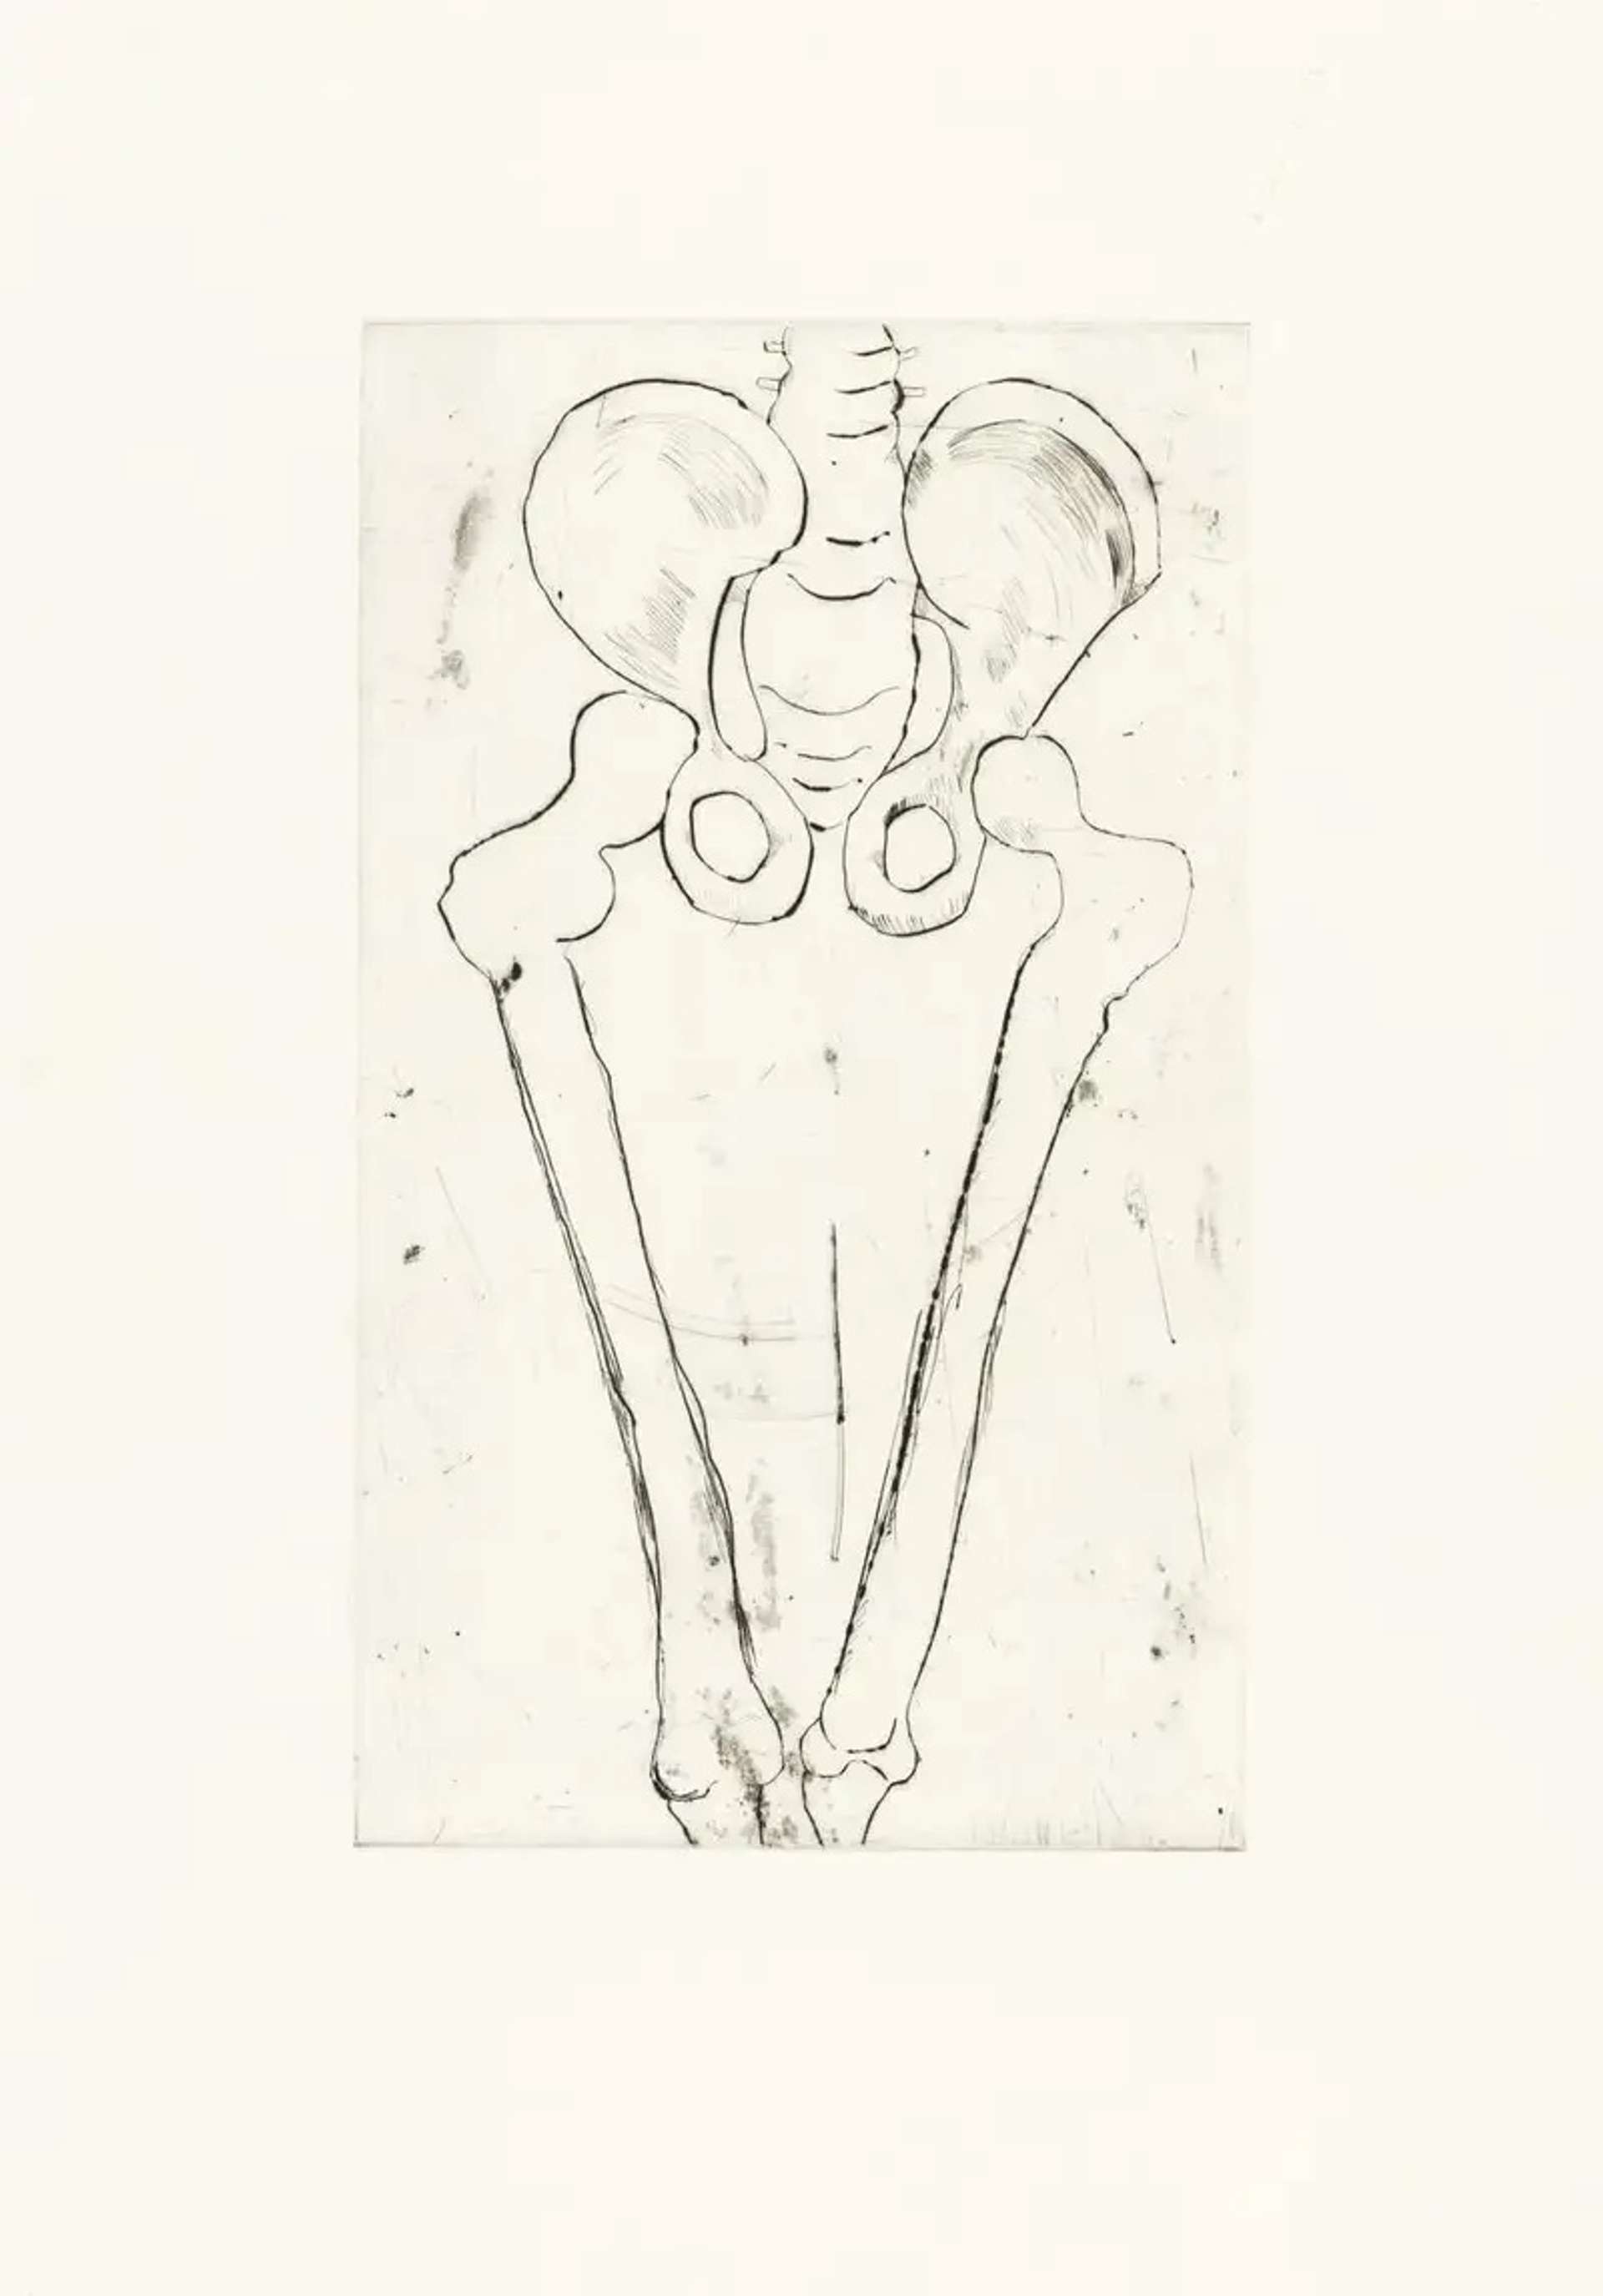 Louise Bourgeois Untitled No. 8. A monochromatic etching of an anatomical depiction of a pelvis and leg bones.